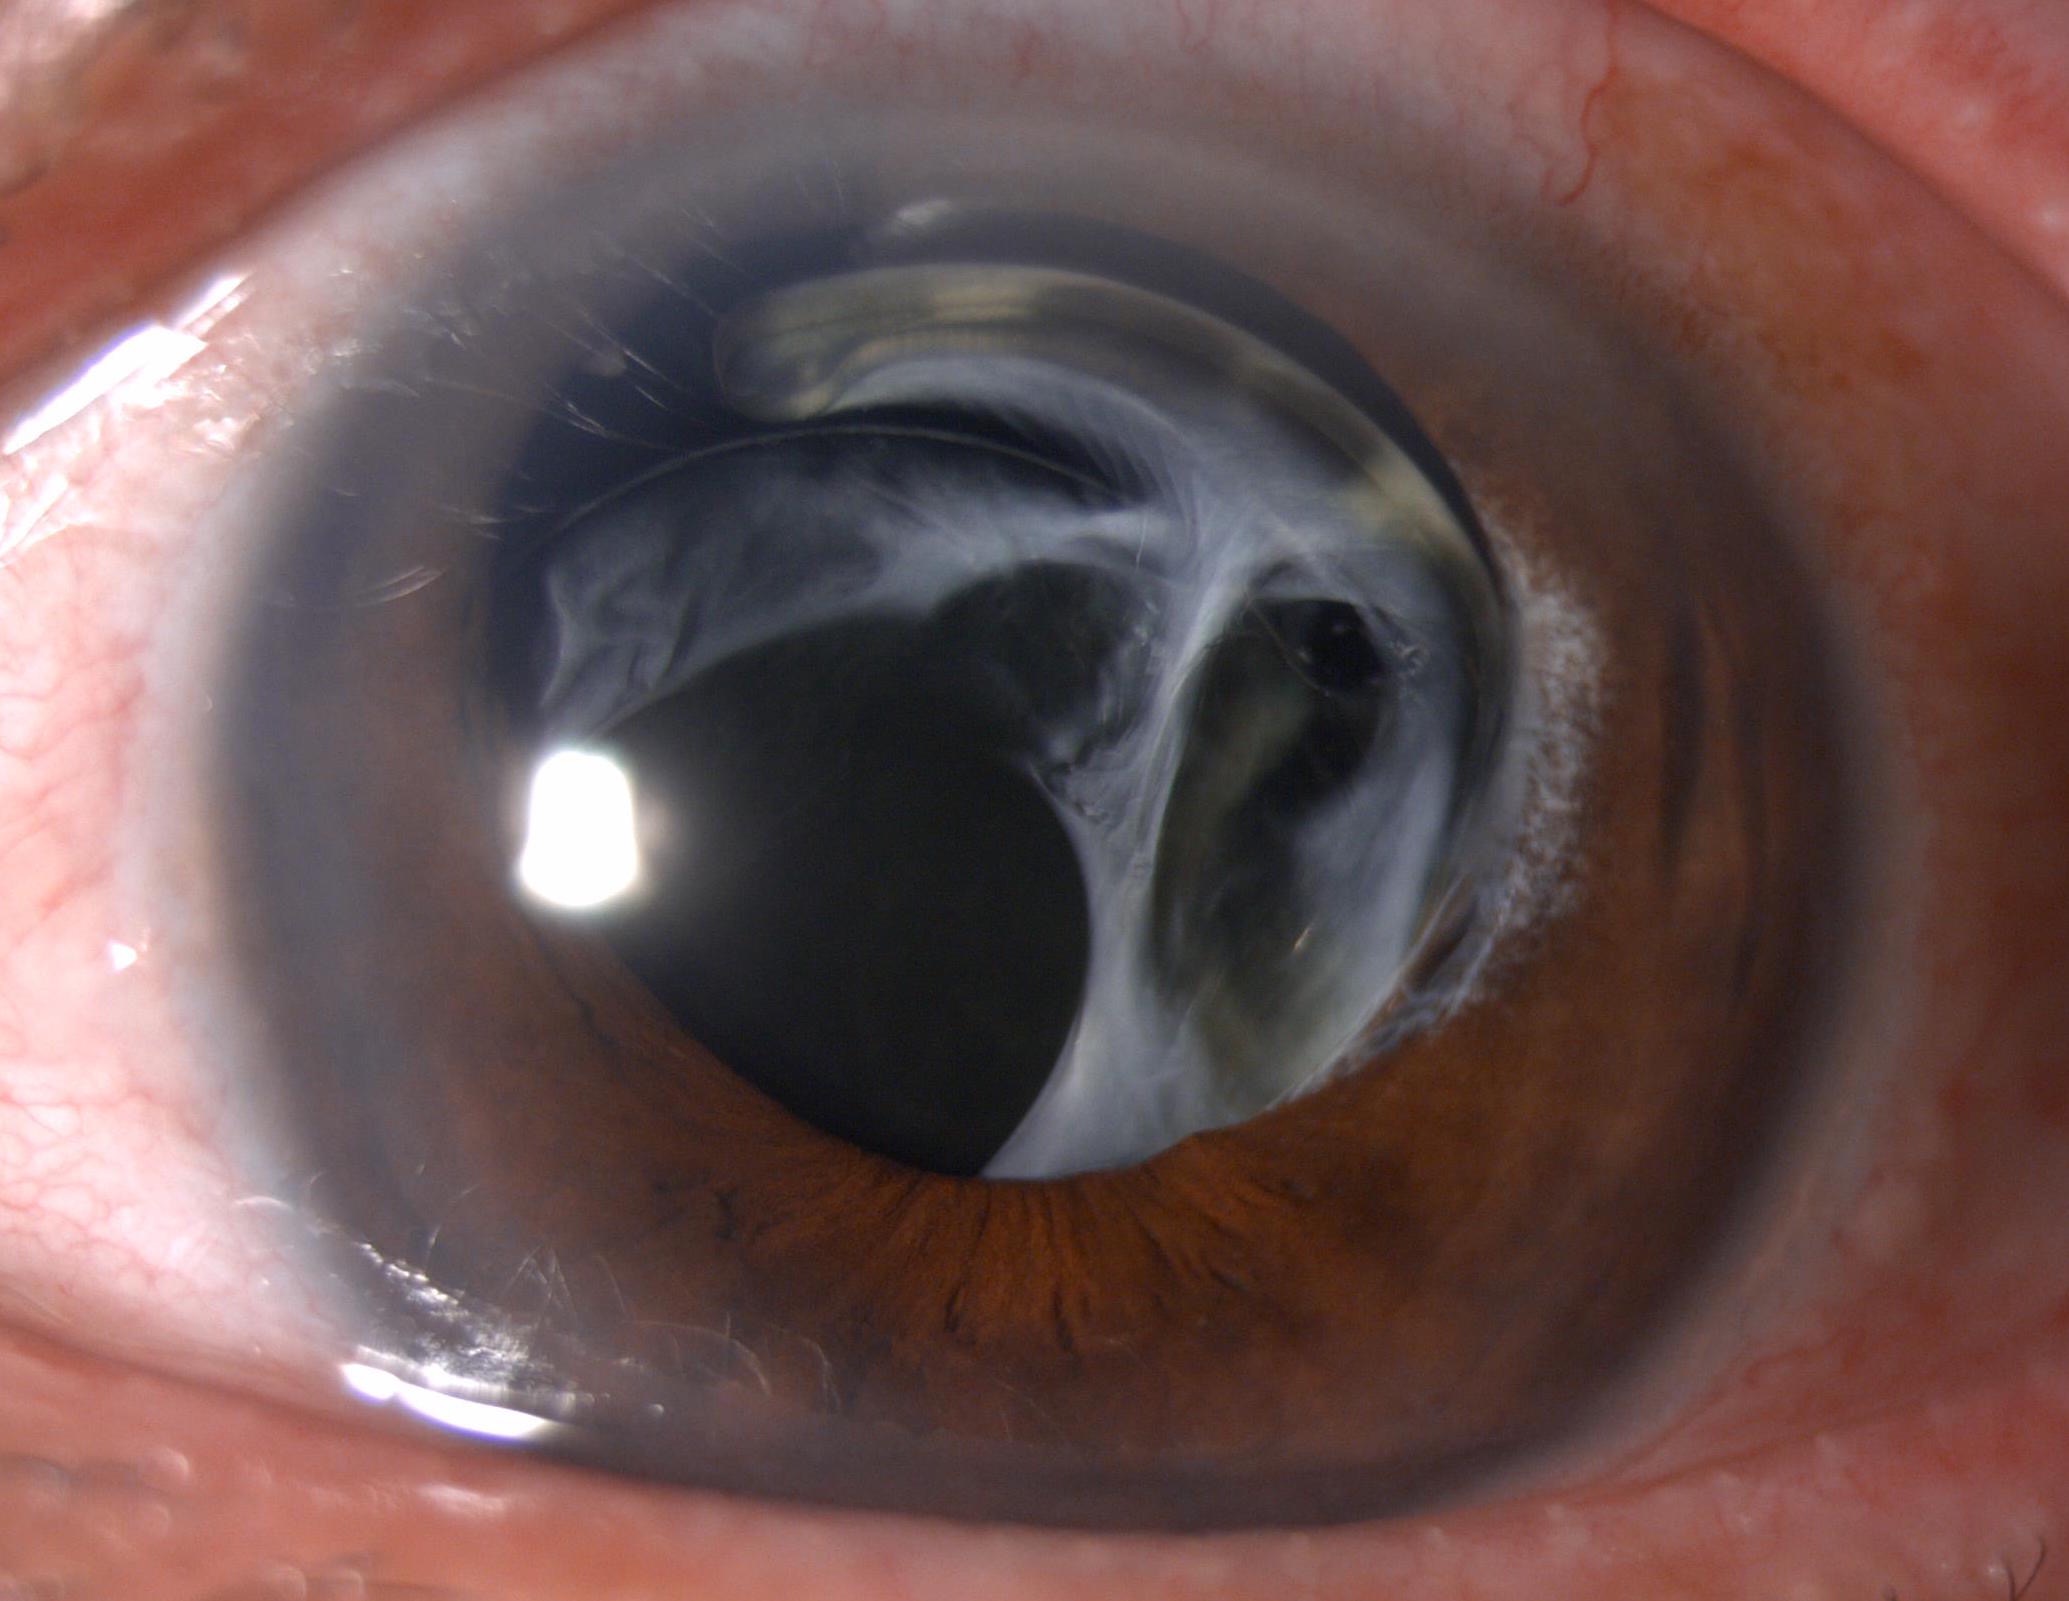 Dislocated Posterior Chamber Intraocular Lens (PCIOL) in